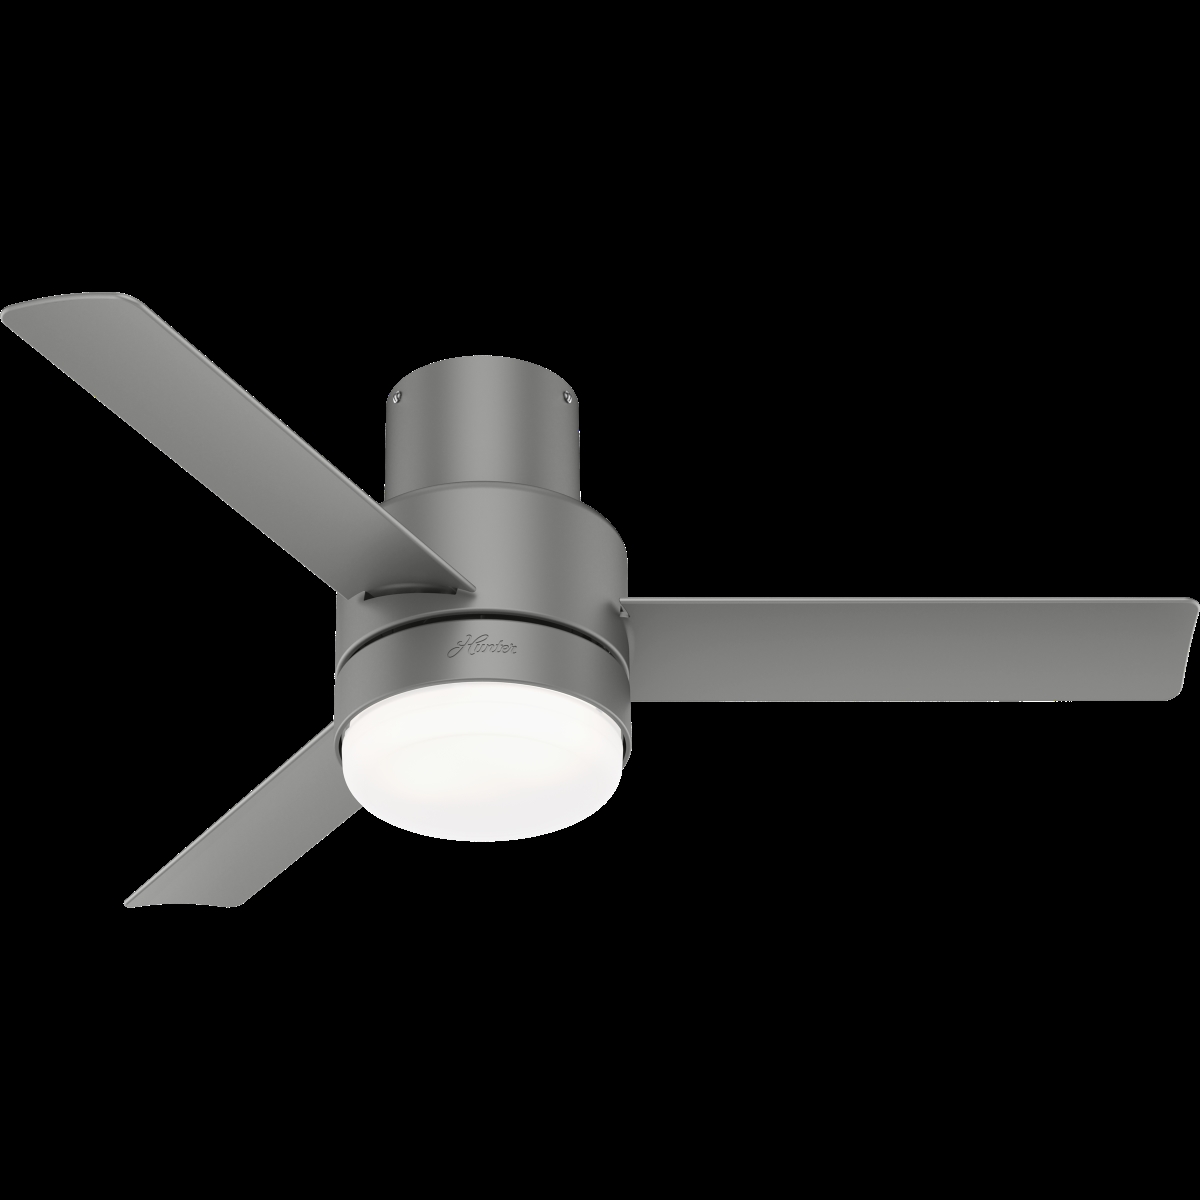 Hunter 51475 44 in. Casablanca Gilmour Matte Silver Low Profile Damp Rated Ceiling Fan with LED Light Kit & Handheld Remote